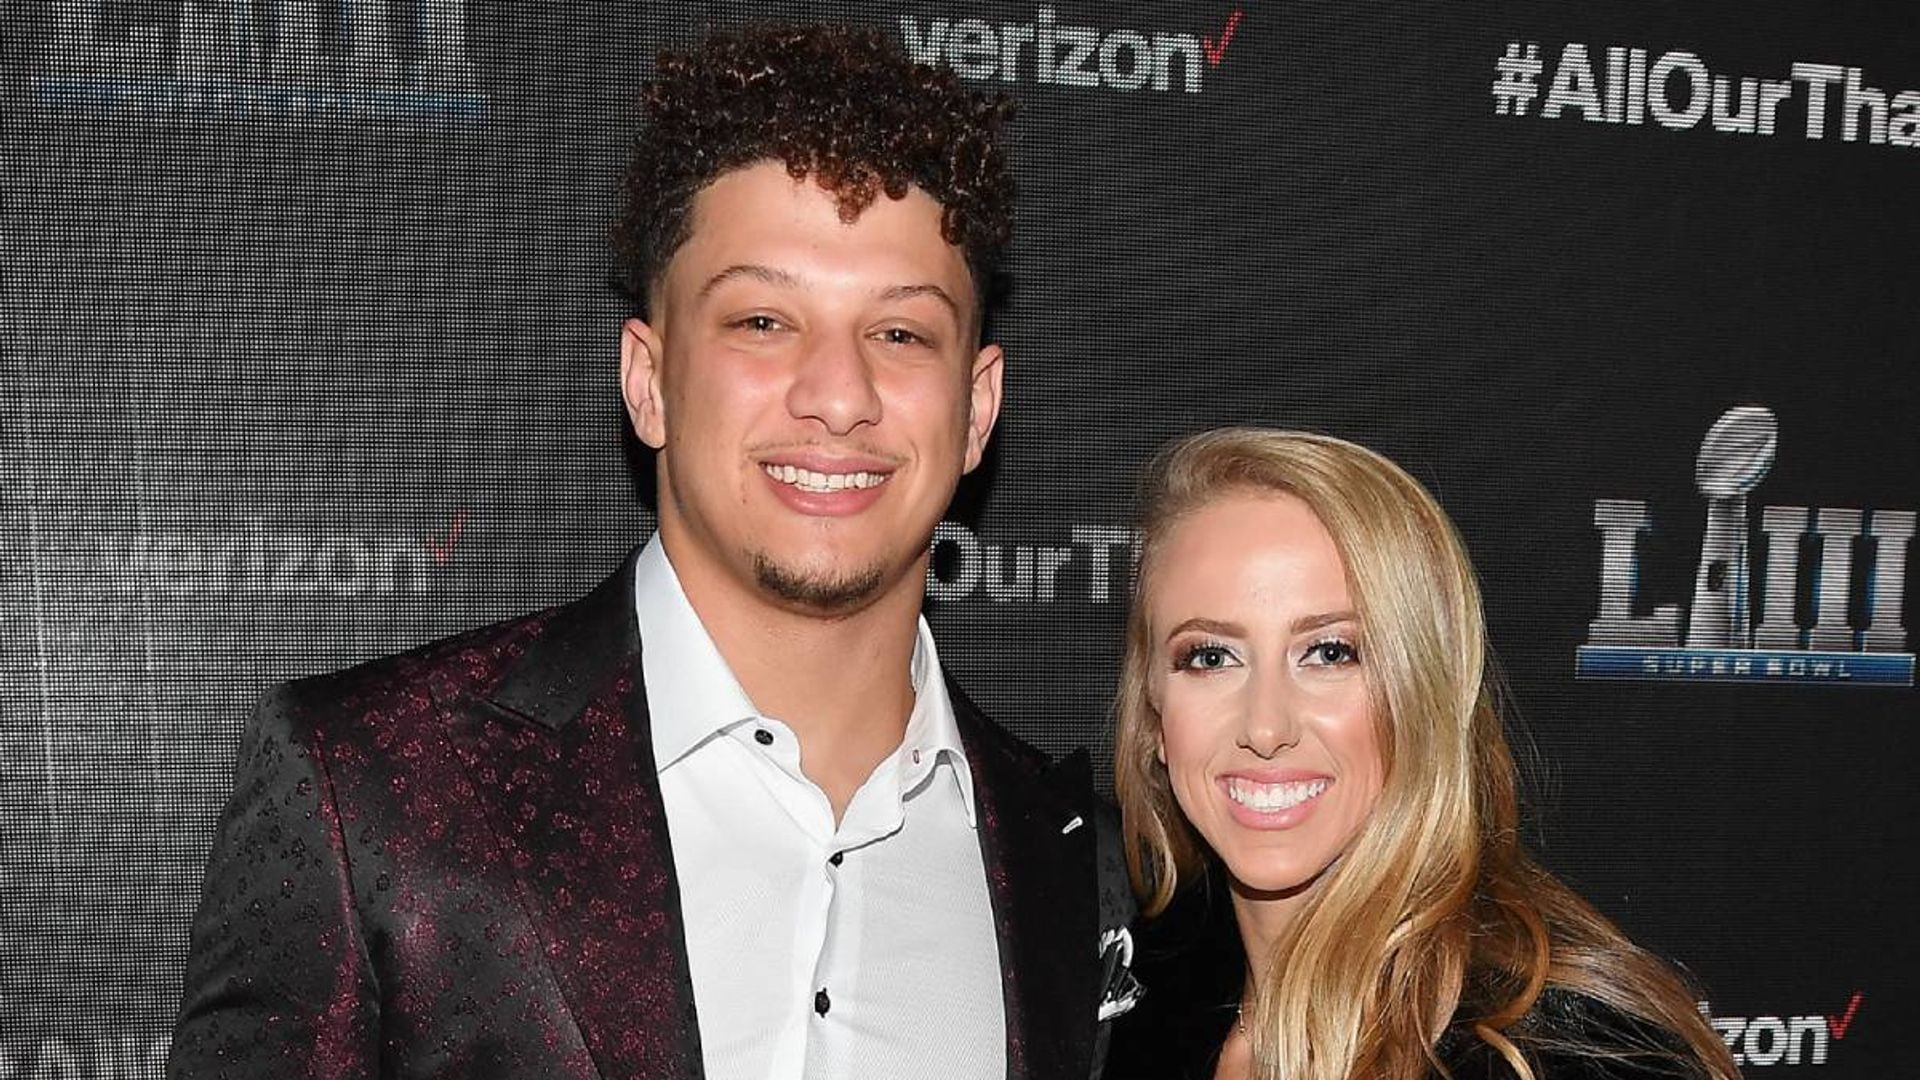 Kansas City Chiefs quarterback Patrick Mahomes love life: all we know about his wife and two